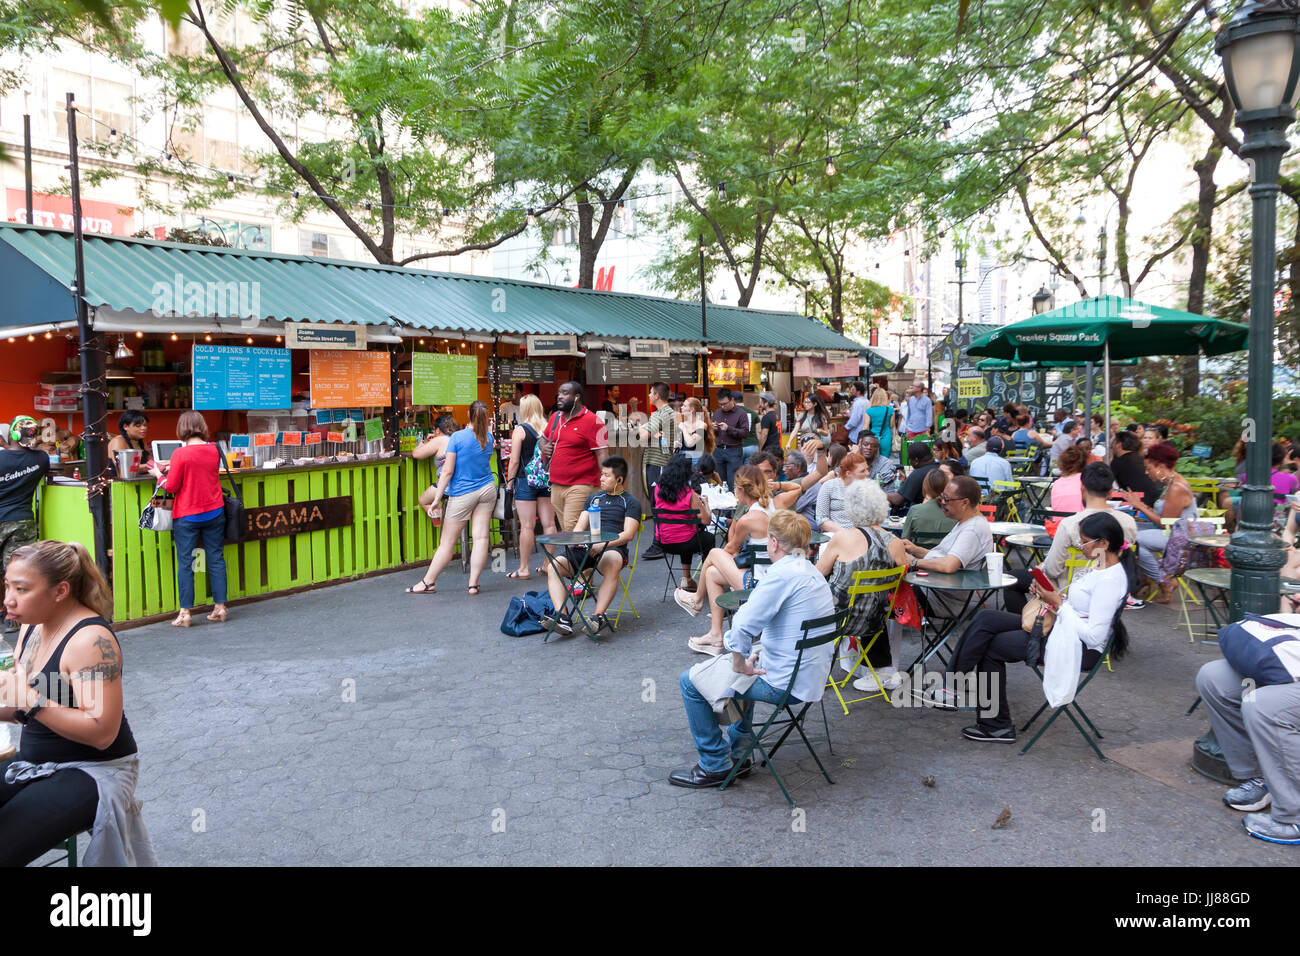 'Broadway Bites' outdoor food vendors in Greeley Square Park, New York City, New York. Stock Photo